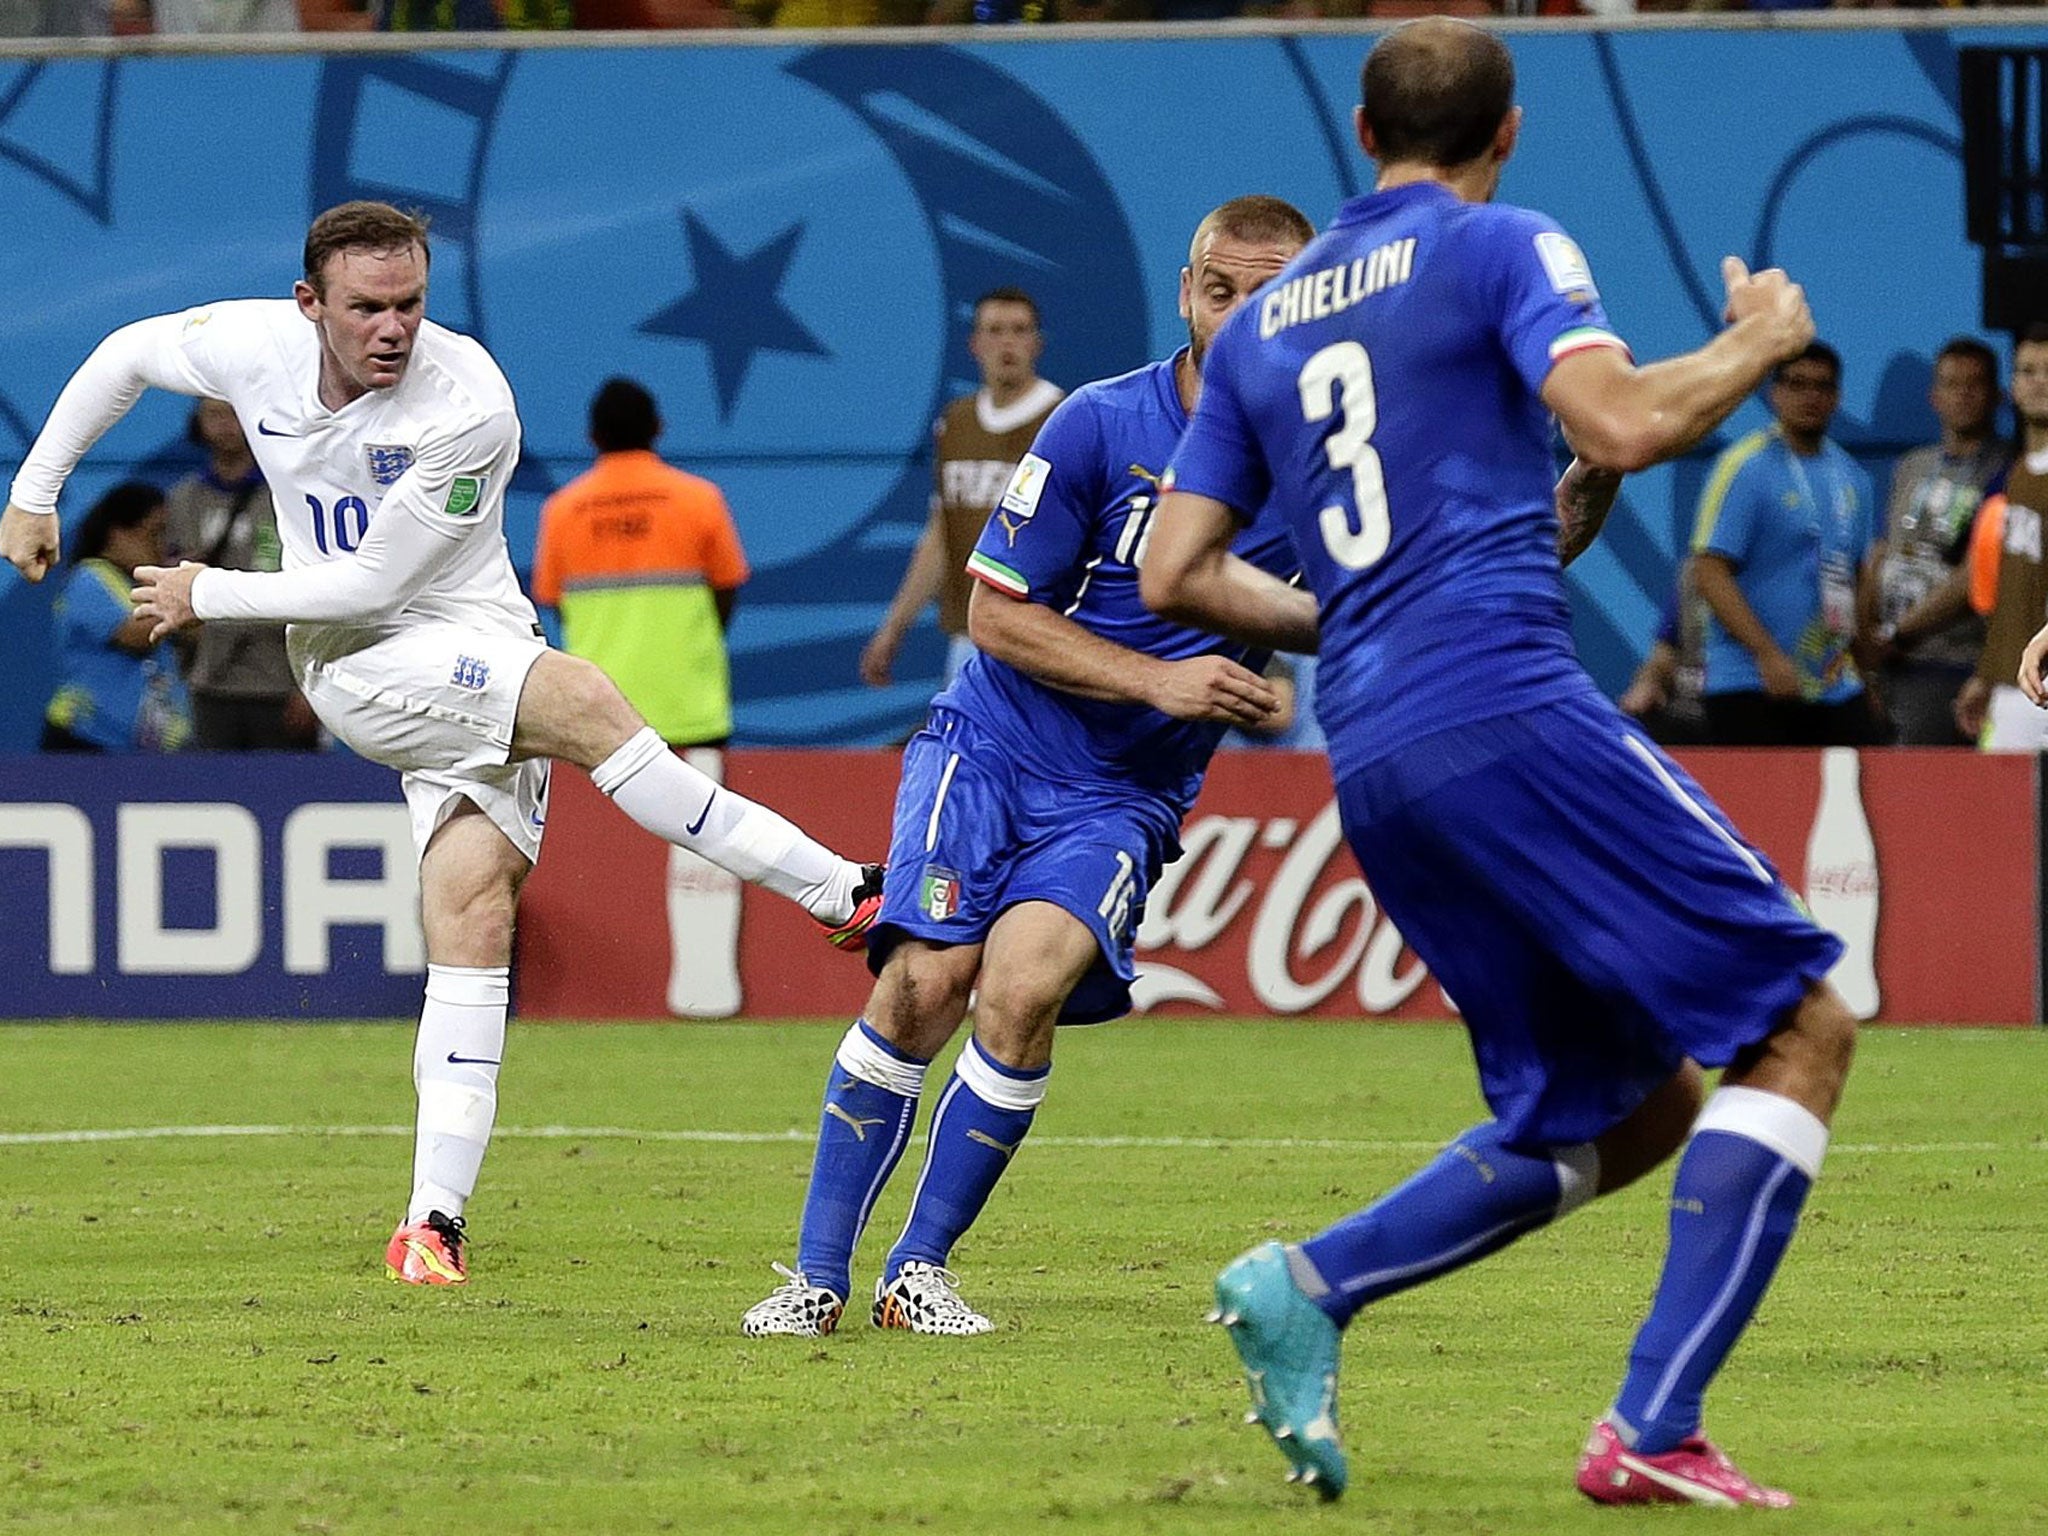 Wayne Rooney hits his most clear-cut chance wide against Italy on Saturday